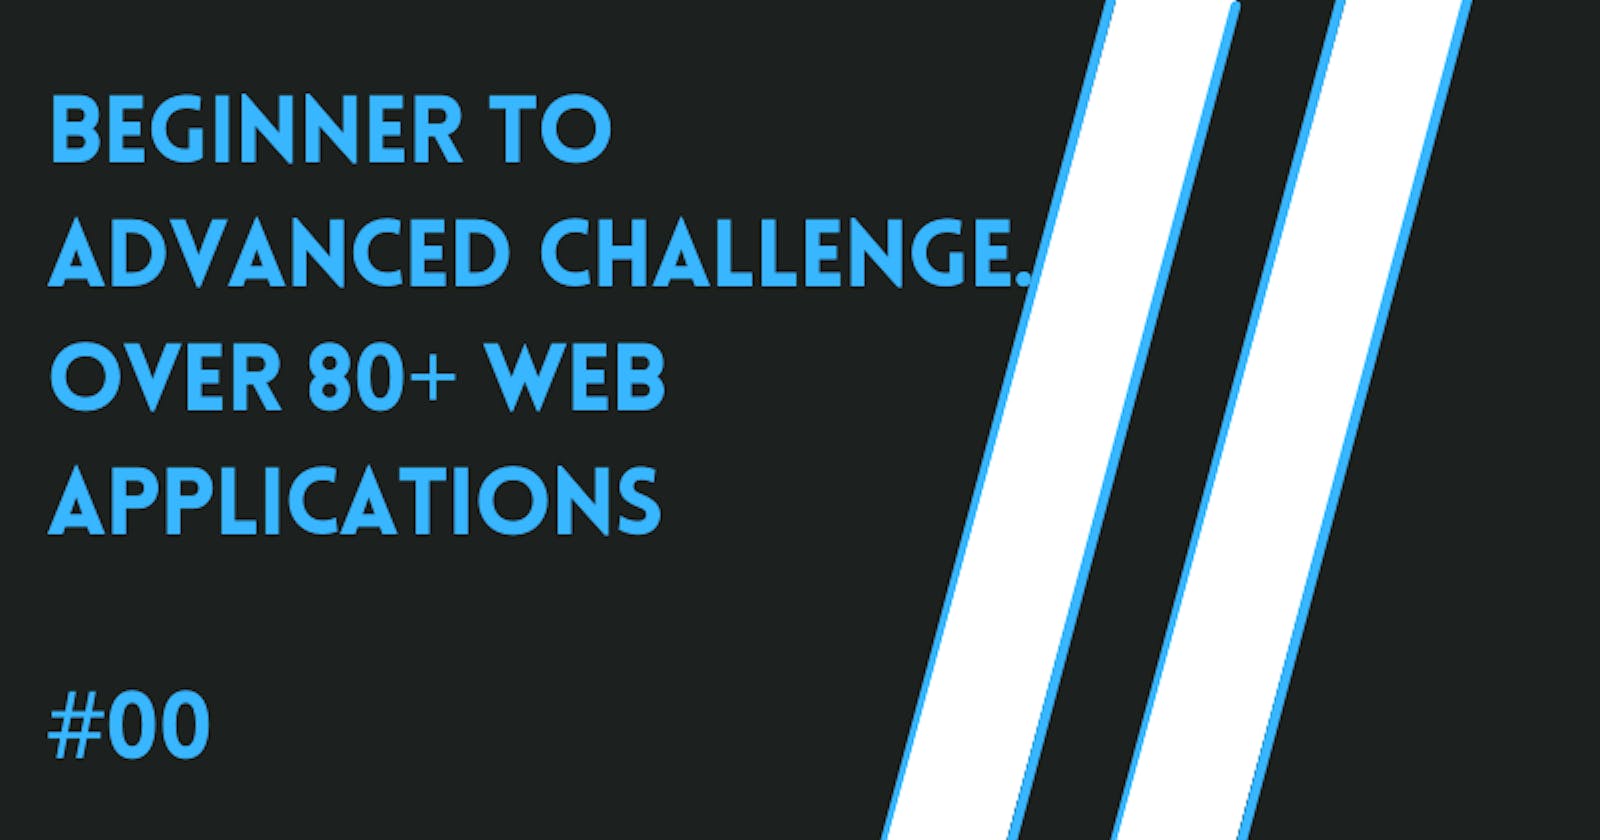 Beginner To Advanced Challenge. Over 80+ web applications